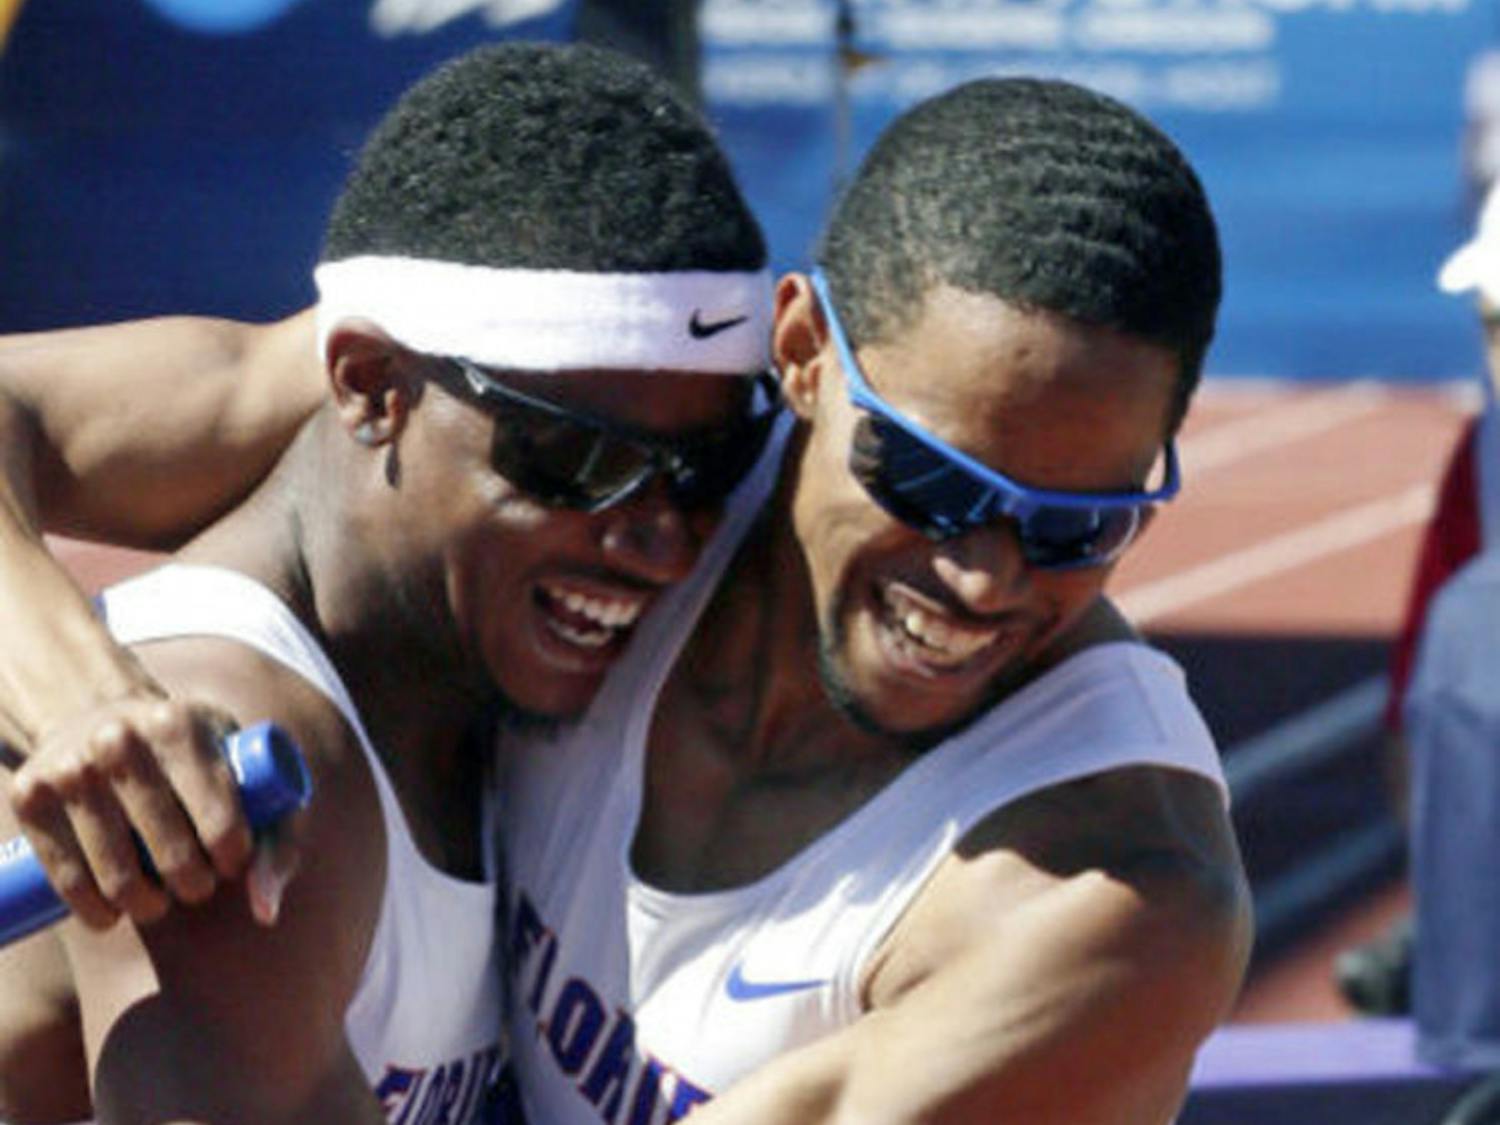 Hugh Graham Jr. (left) hugs Arman Hall after winning the 4x400m relay during the NCAA Outdoor Championships in Eugene, Ore., on Jun. 8, 2013.